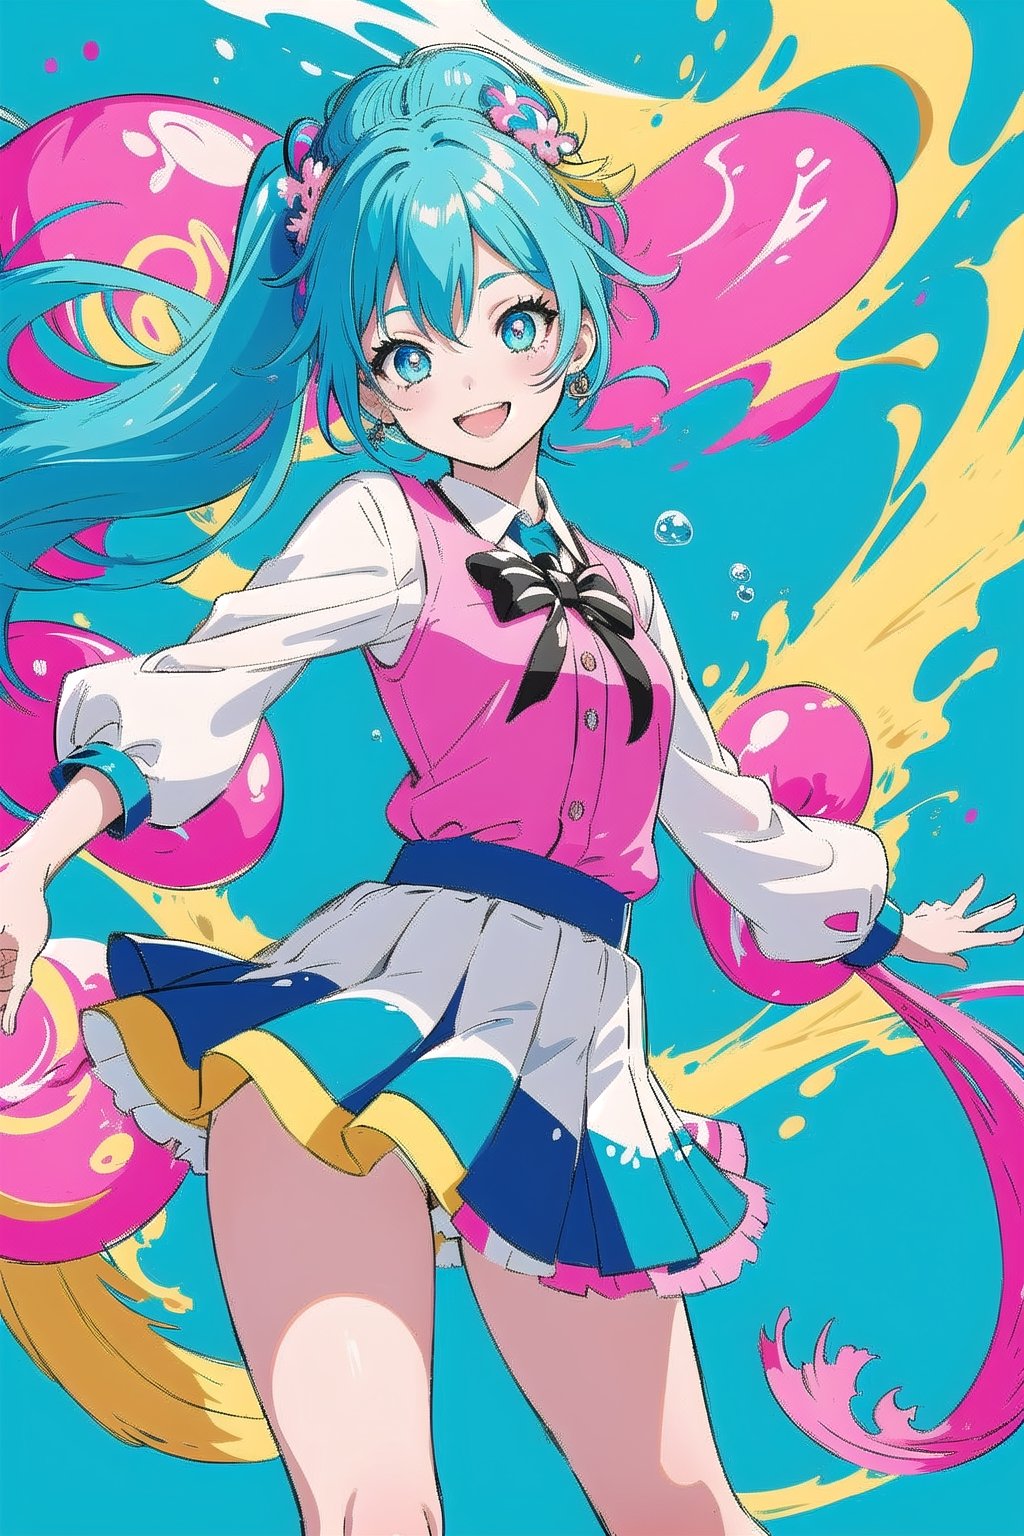 Create a vibrant, colorful anime-style illustration of a joyful girl with light blue hair, styled in two high ponytails with some strands playfully flowing around. The girl has bright, expressive eyes with multiple colors and a wide, happy smile. She is wearing a modern, stylish outfit, possibly a school uniform with a touch of fantasy elements. The background is an underwater scene filled with splashes of bright colors, giving it a surreal and lively atmosphere. Include various colorful fish, predominantly pink and blue, swimming around her, and add bubbles and abstract patterns to enhance the dynamic feel of the scene. The overall color palette should be vivid, featuring blues, pinks, yellows, and a touch of white, creating a cheerful and energetic composition.